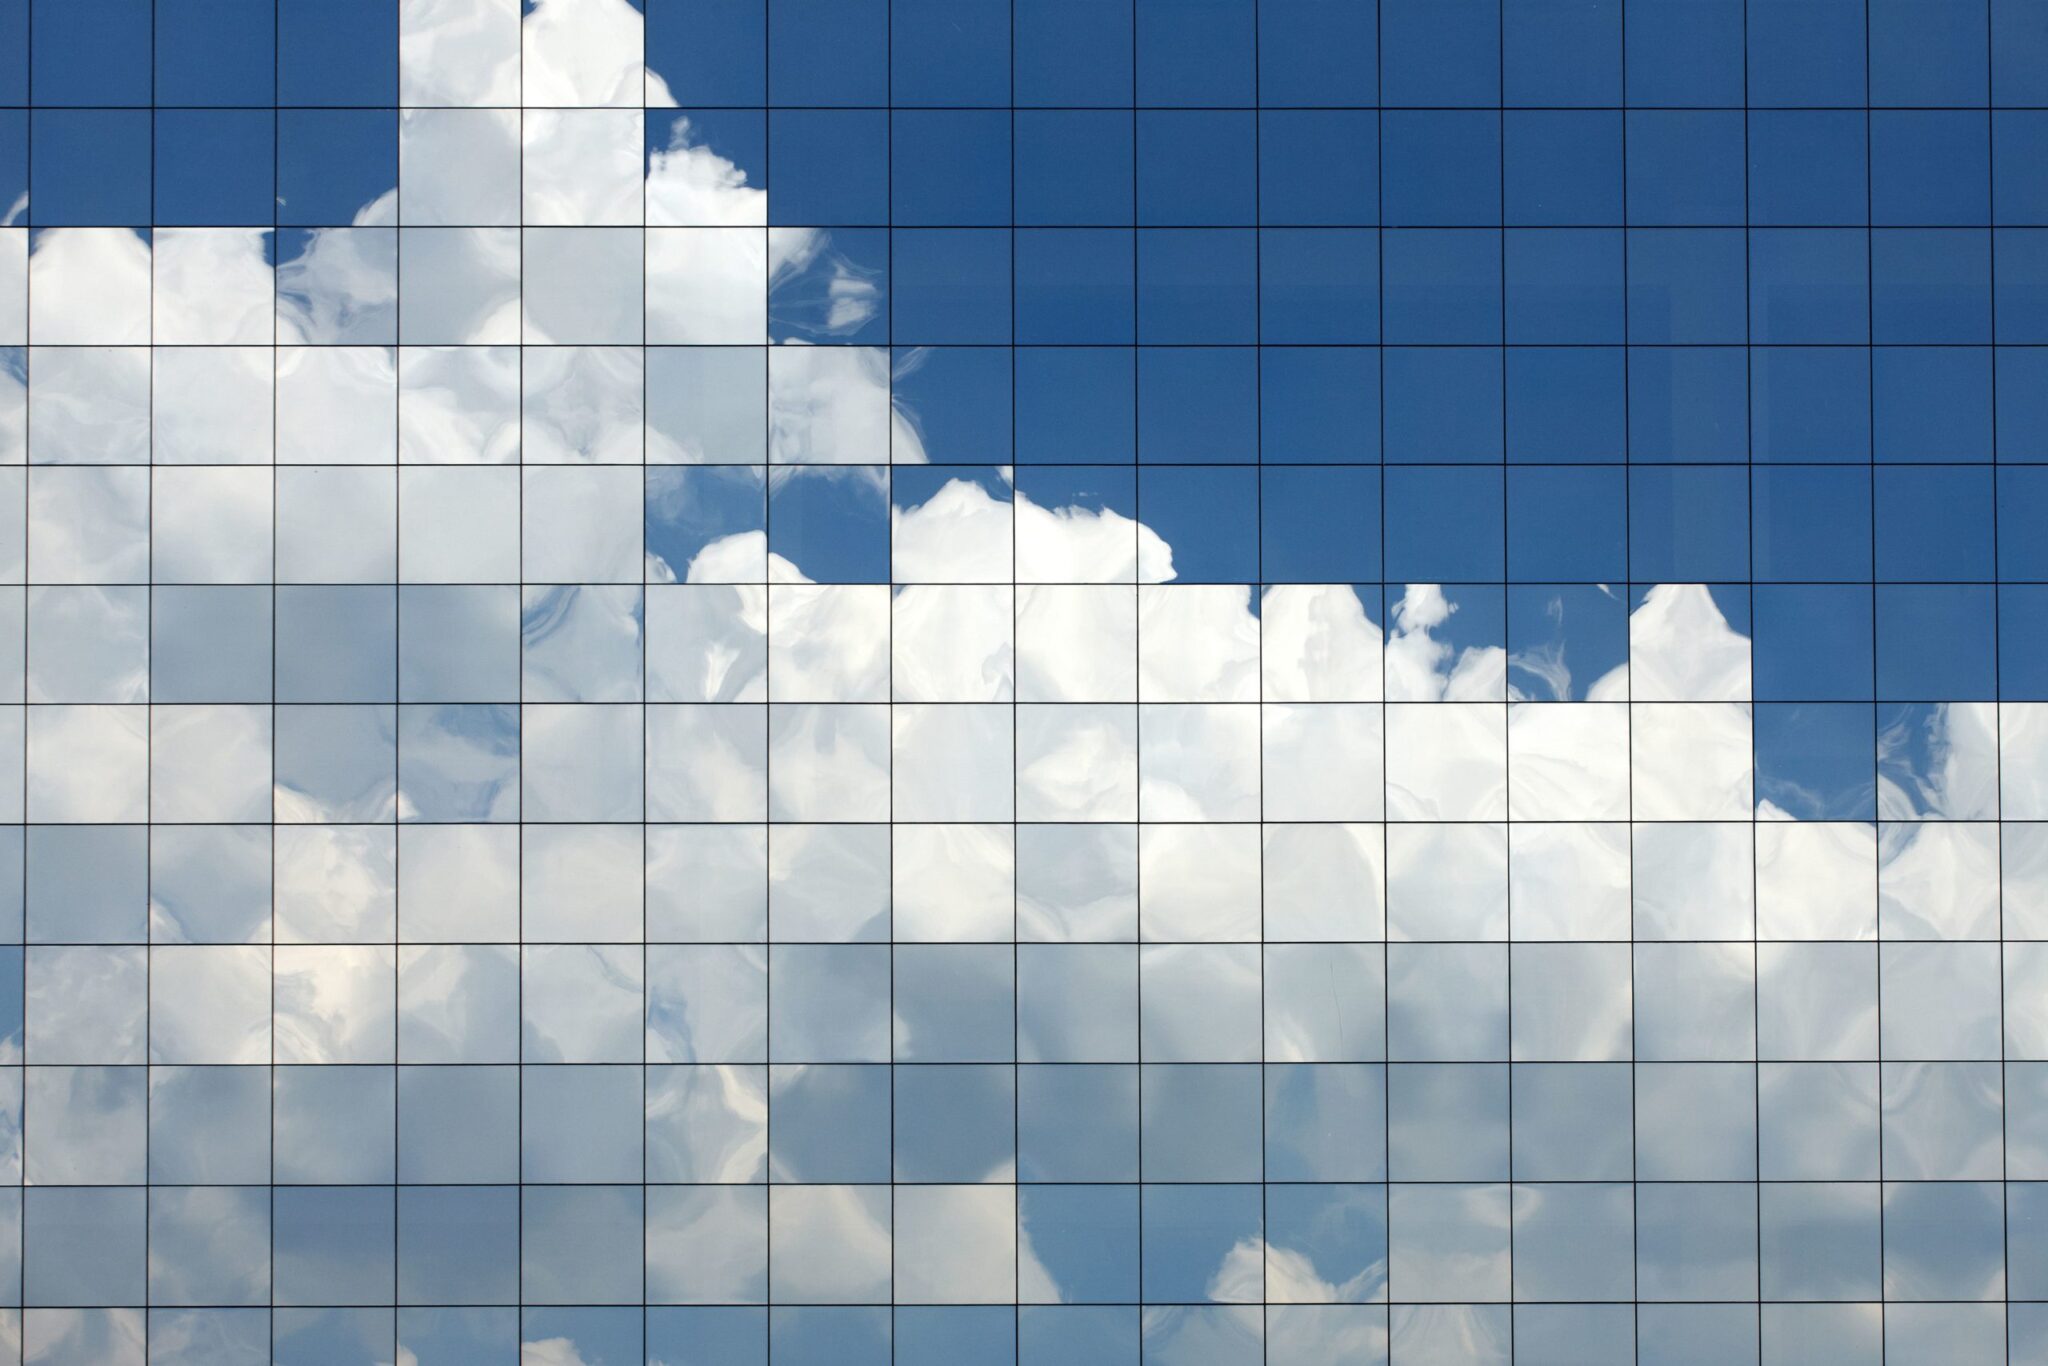 Cloud Architecture: An Introductory Guide